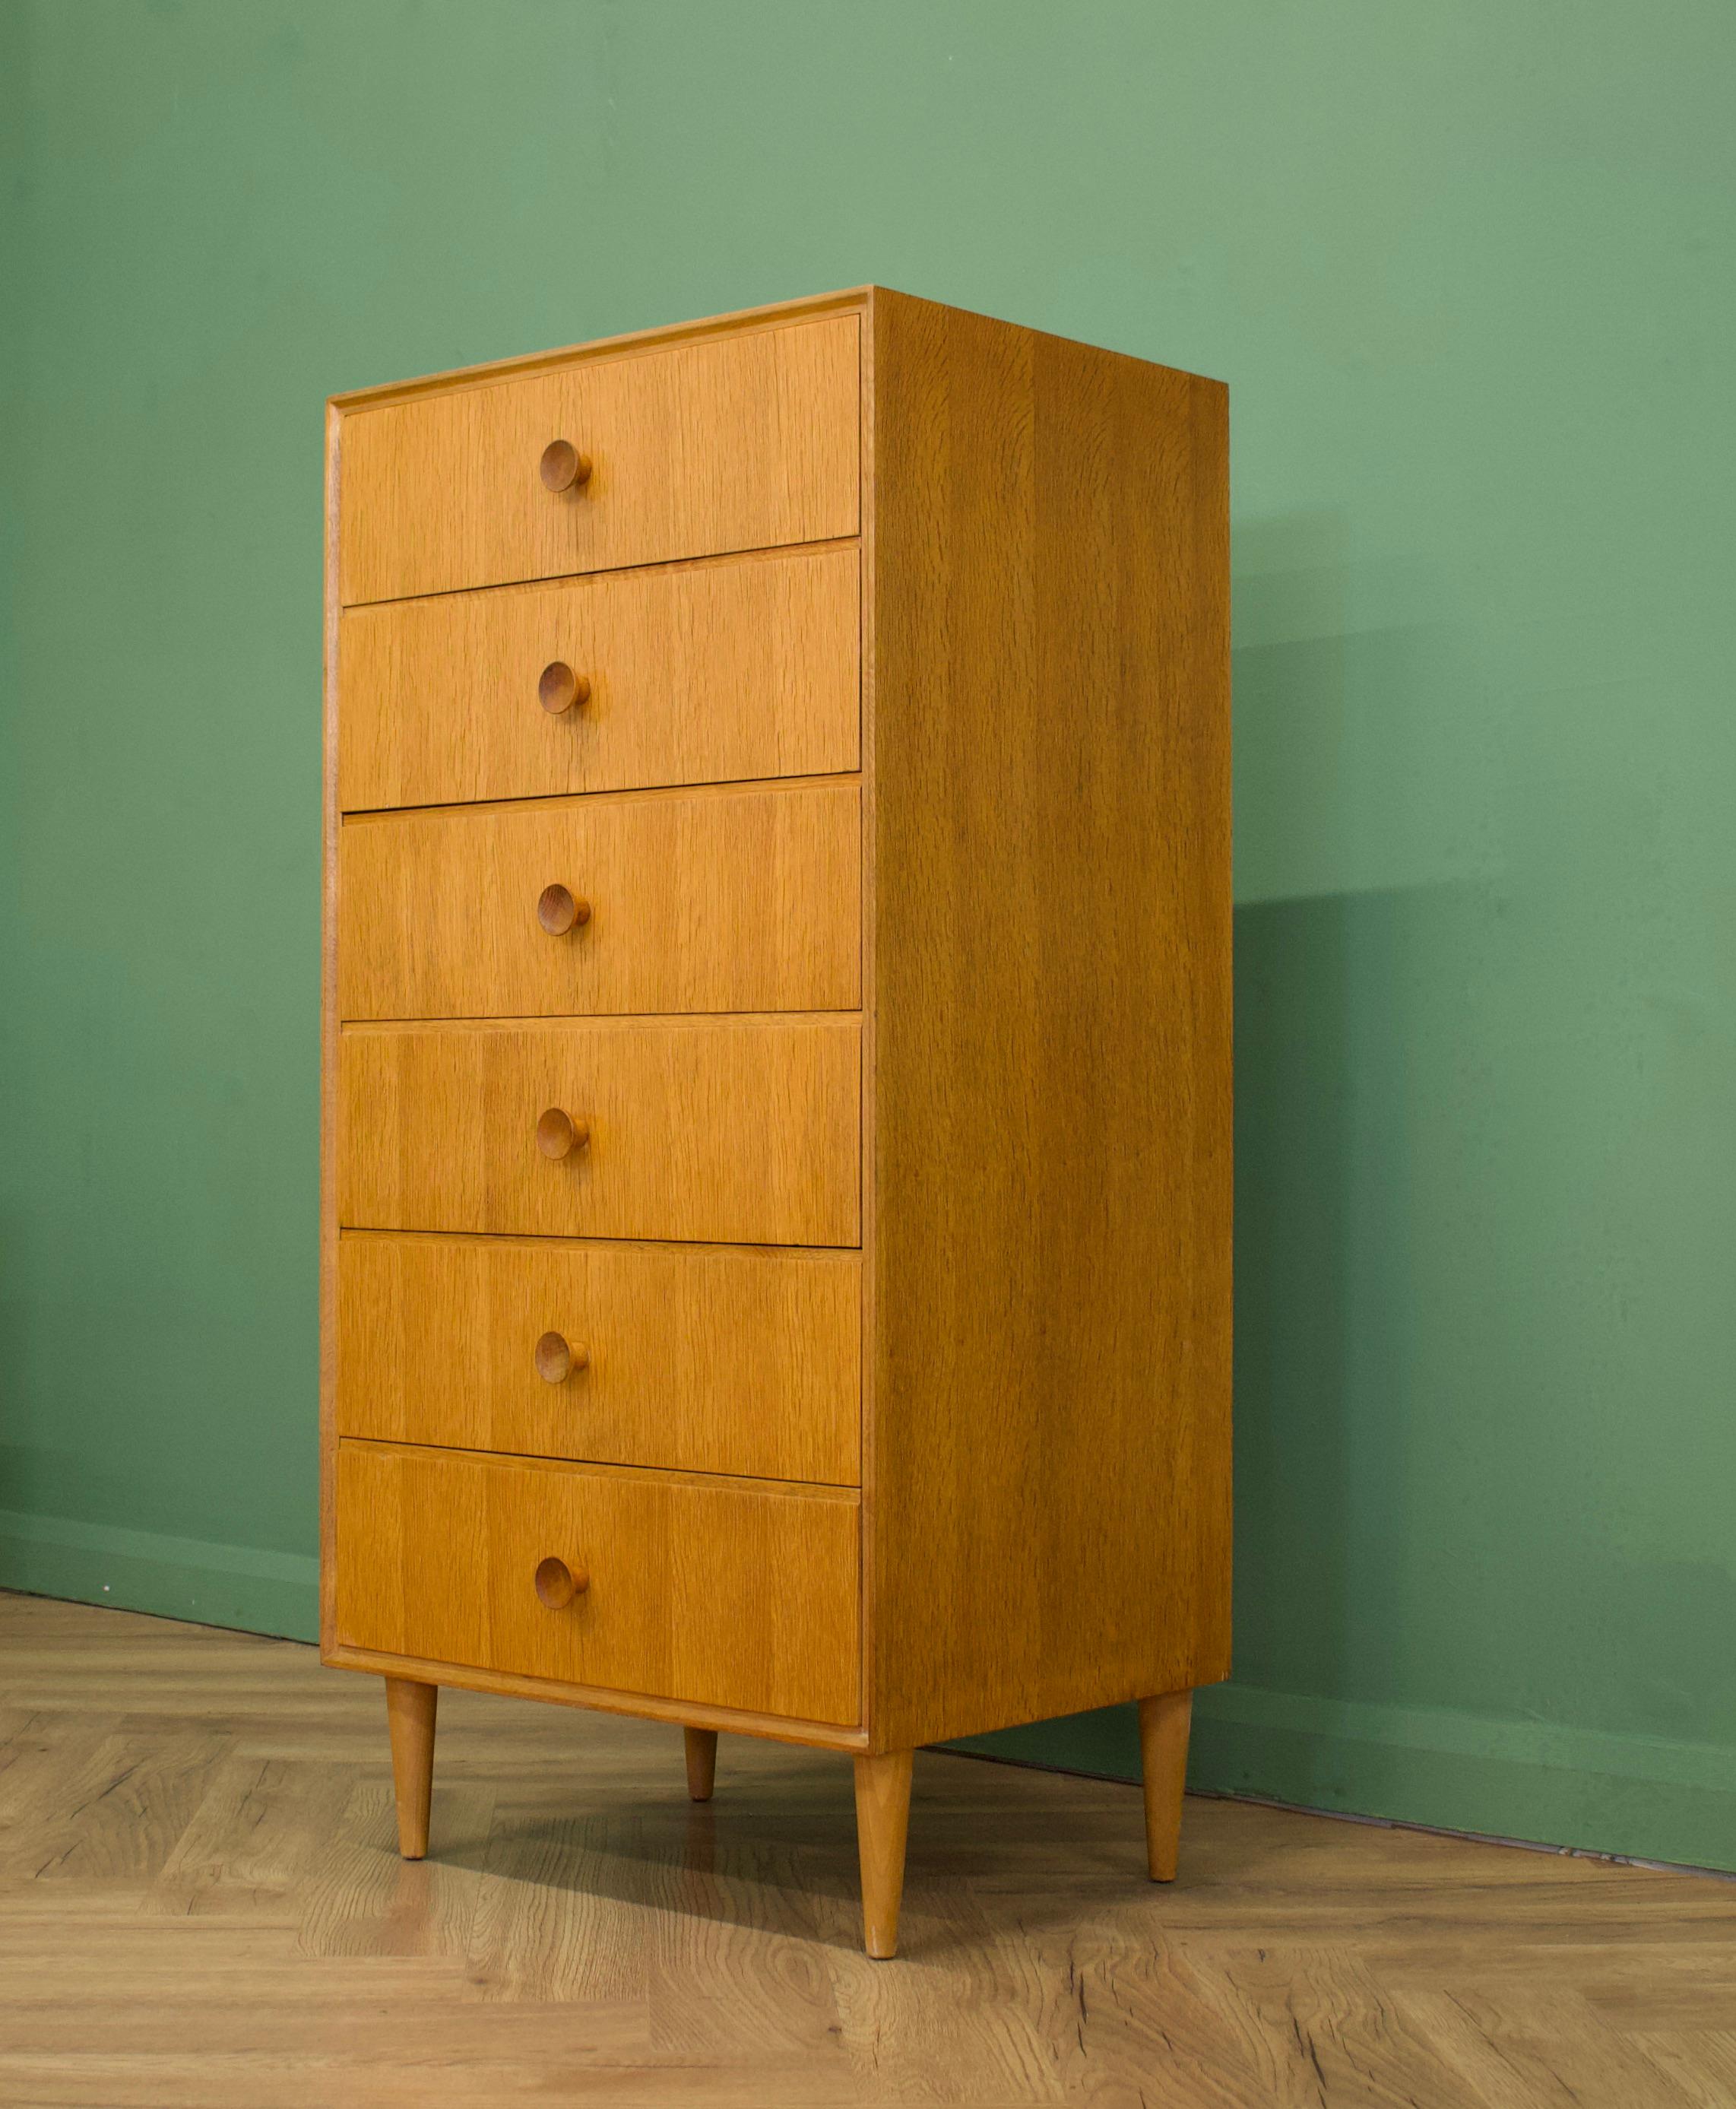 Midcentury tall boy chest of drawers.
Manufactured in the UK by Meredew
Made from oak and oak veneer.

Featuring solid oak handles and six drawers.
 